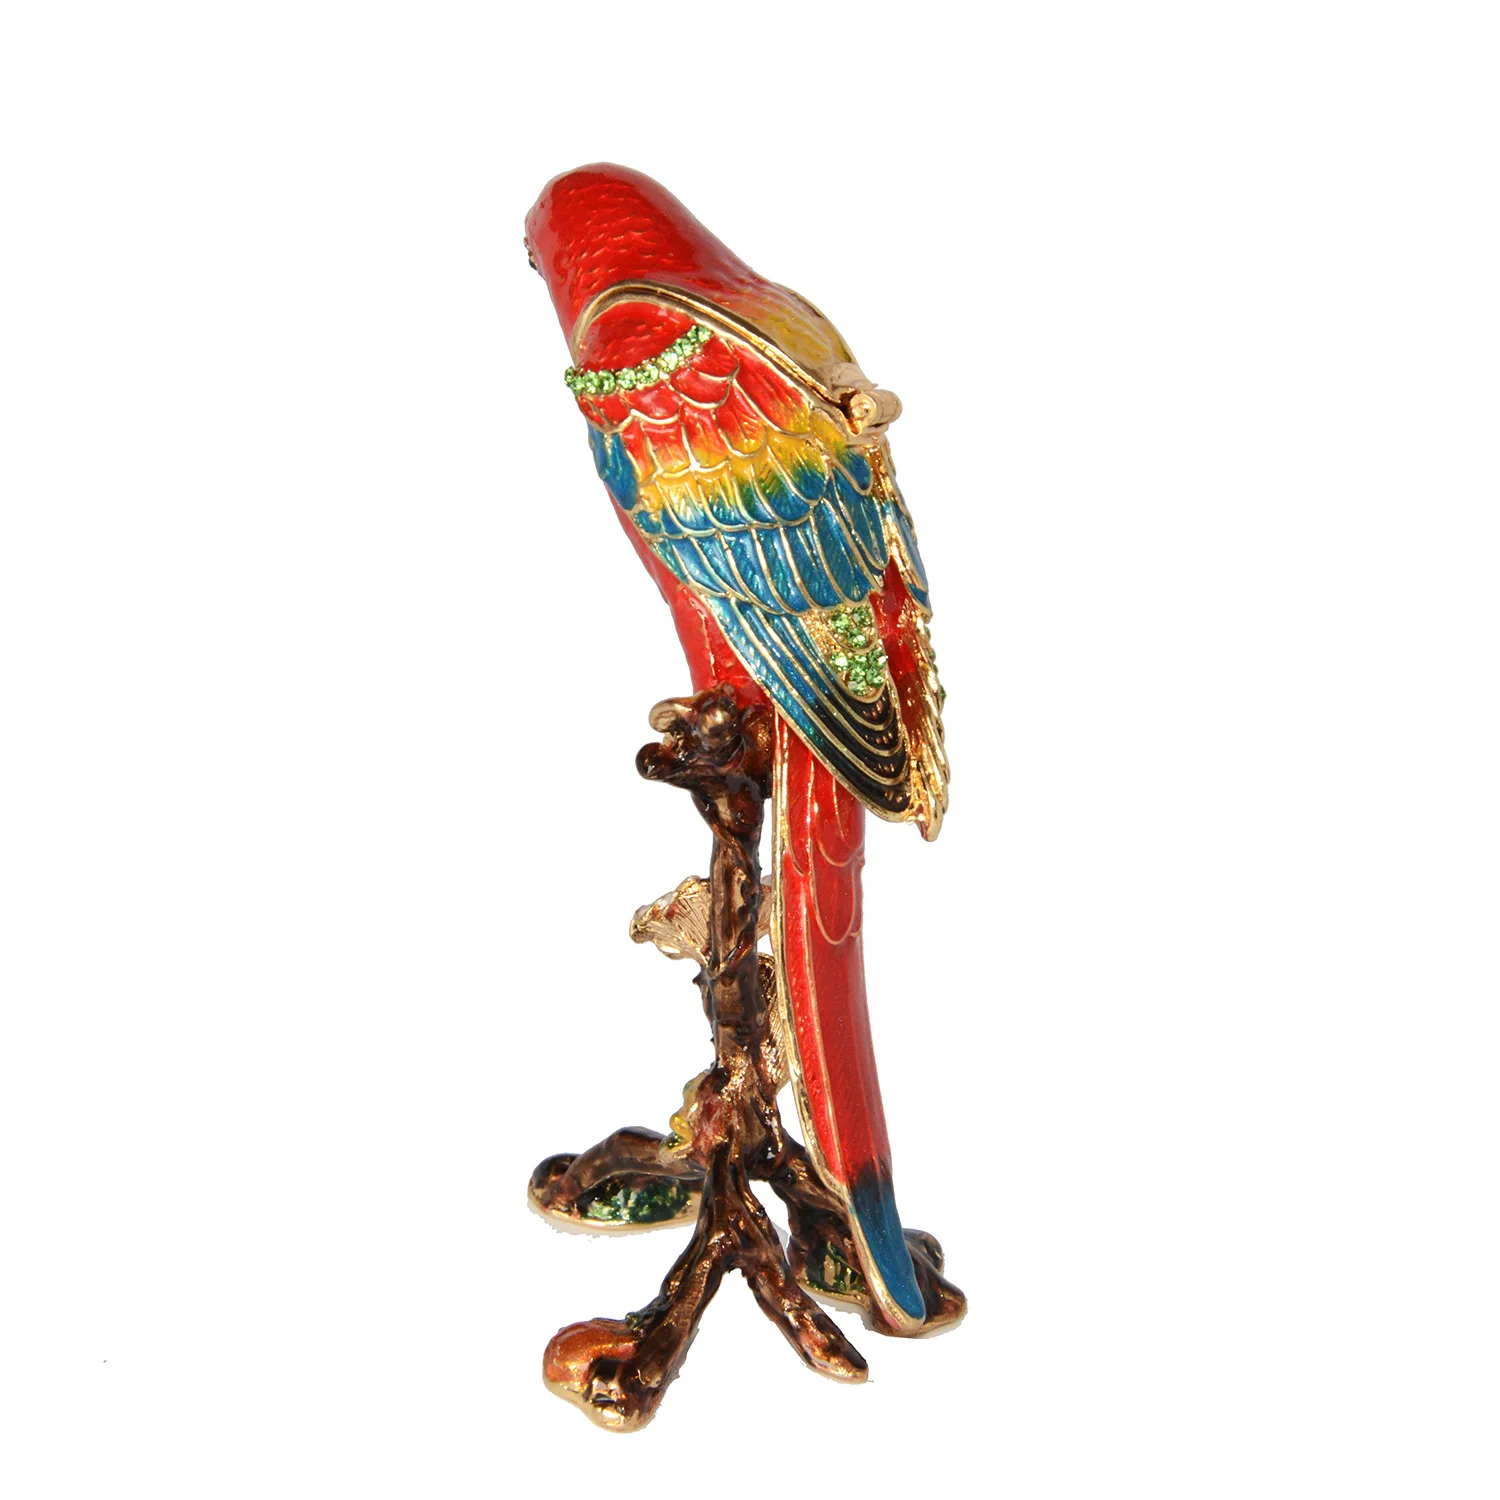 Parrot Bird Trinket Box with Hinged Lid Enamel Bejeweled Crystal Unique Ornament 